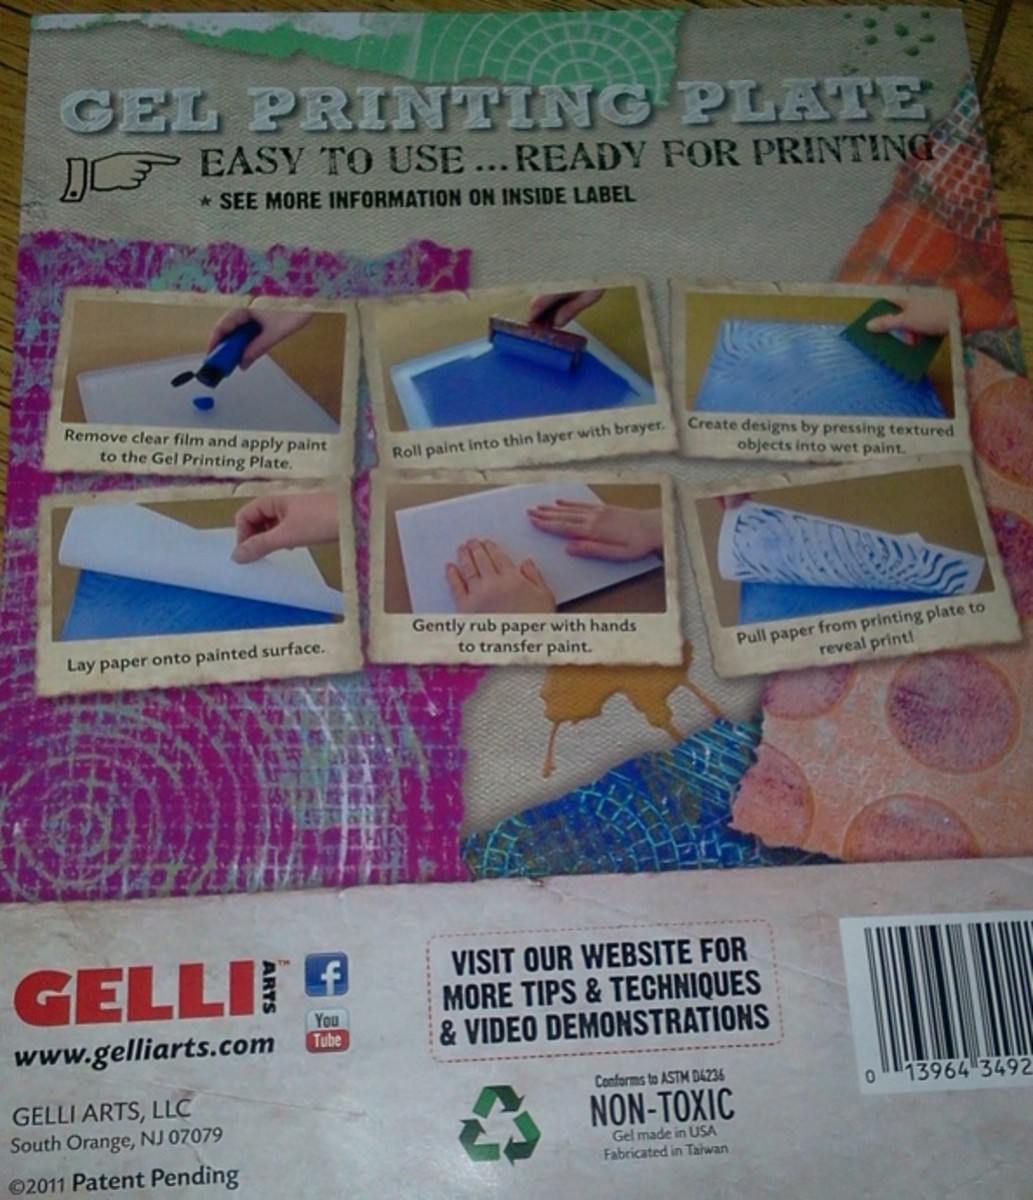 The Gelli Arts insert has instructions on the basics, clean up, storage and general tips for using the gel plate.